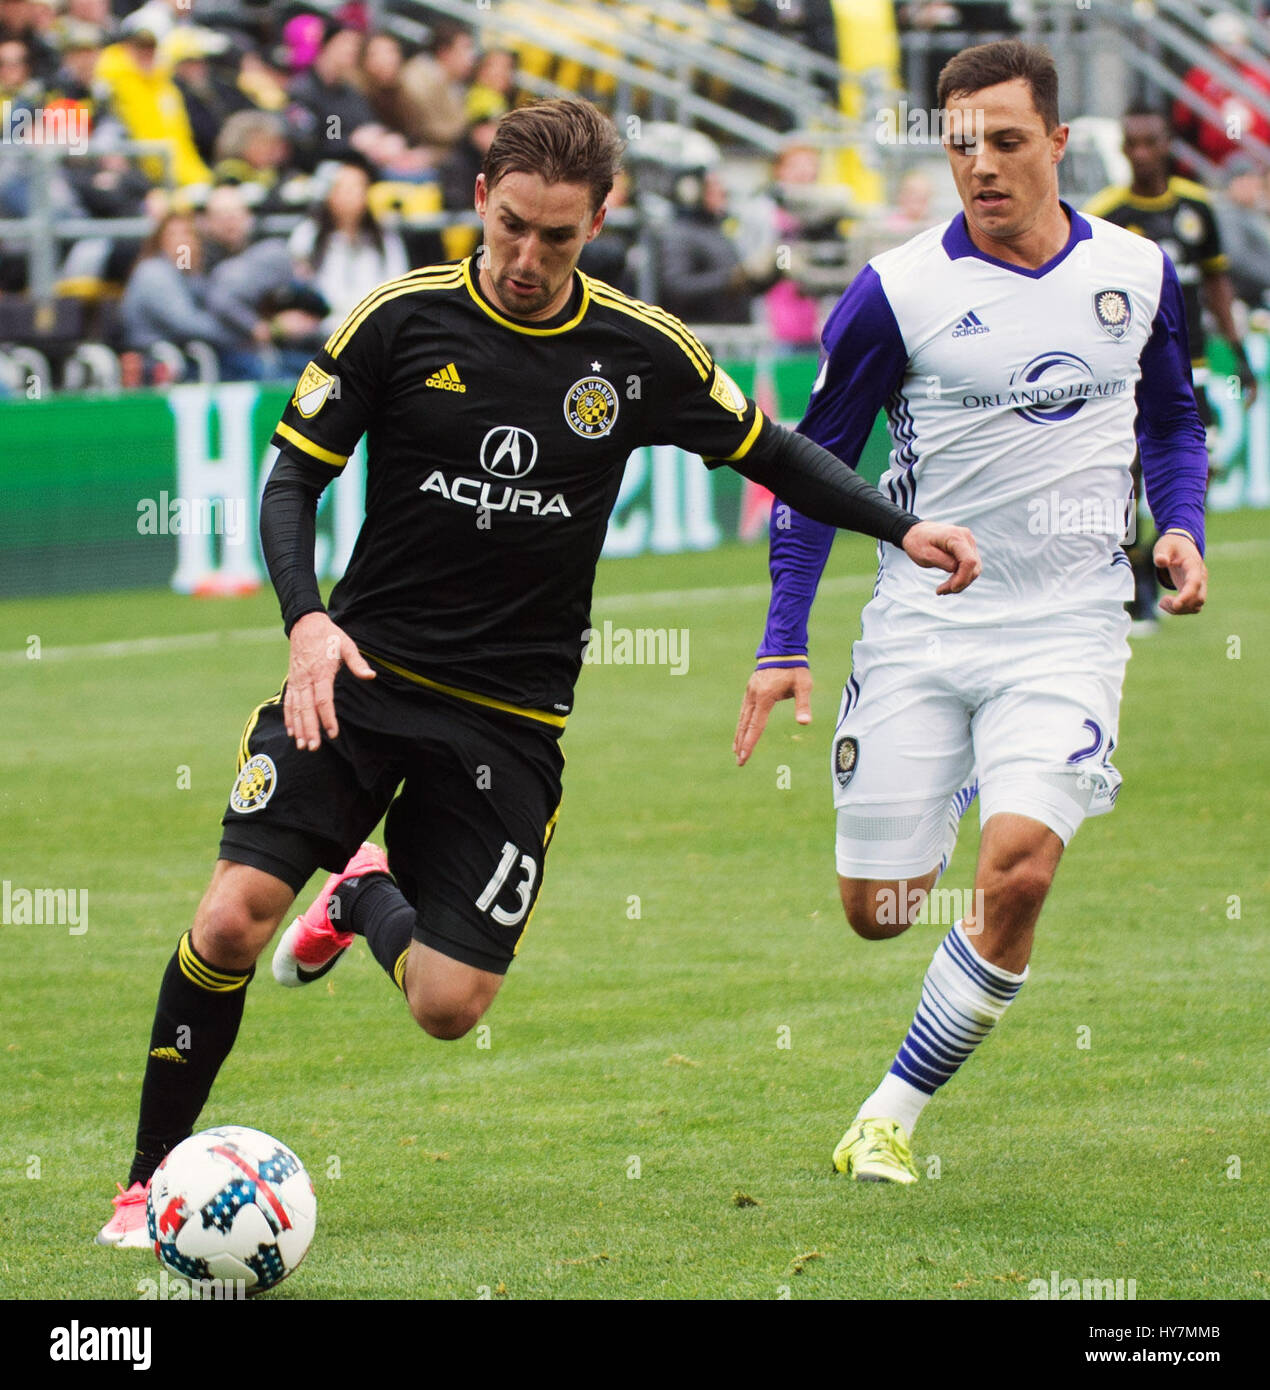 April 1, 2017: Columbus Crew SC midfielder Ethan Finlay (13)dribbles the ball against Orlando City in their match at Mapfre Stadium in Columbus, Ohio. Brent Clark/Alamy Stock Photo